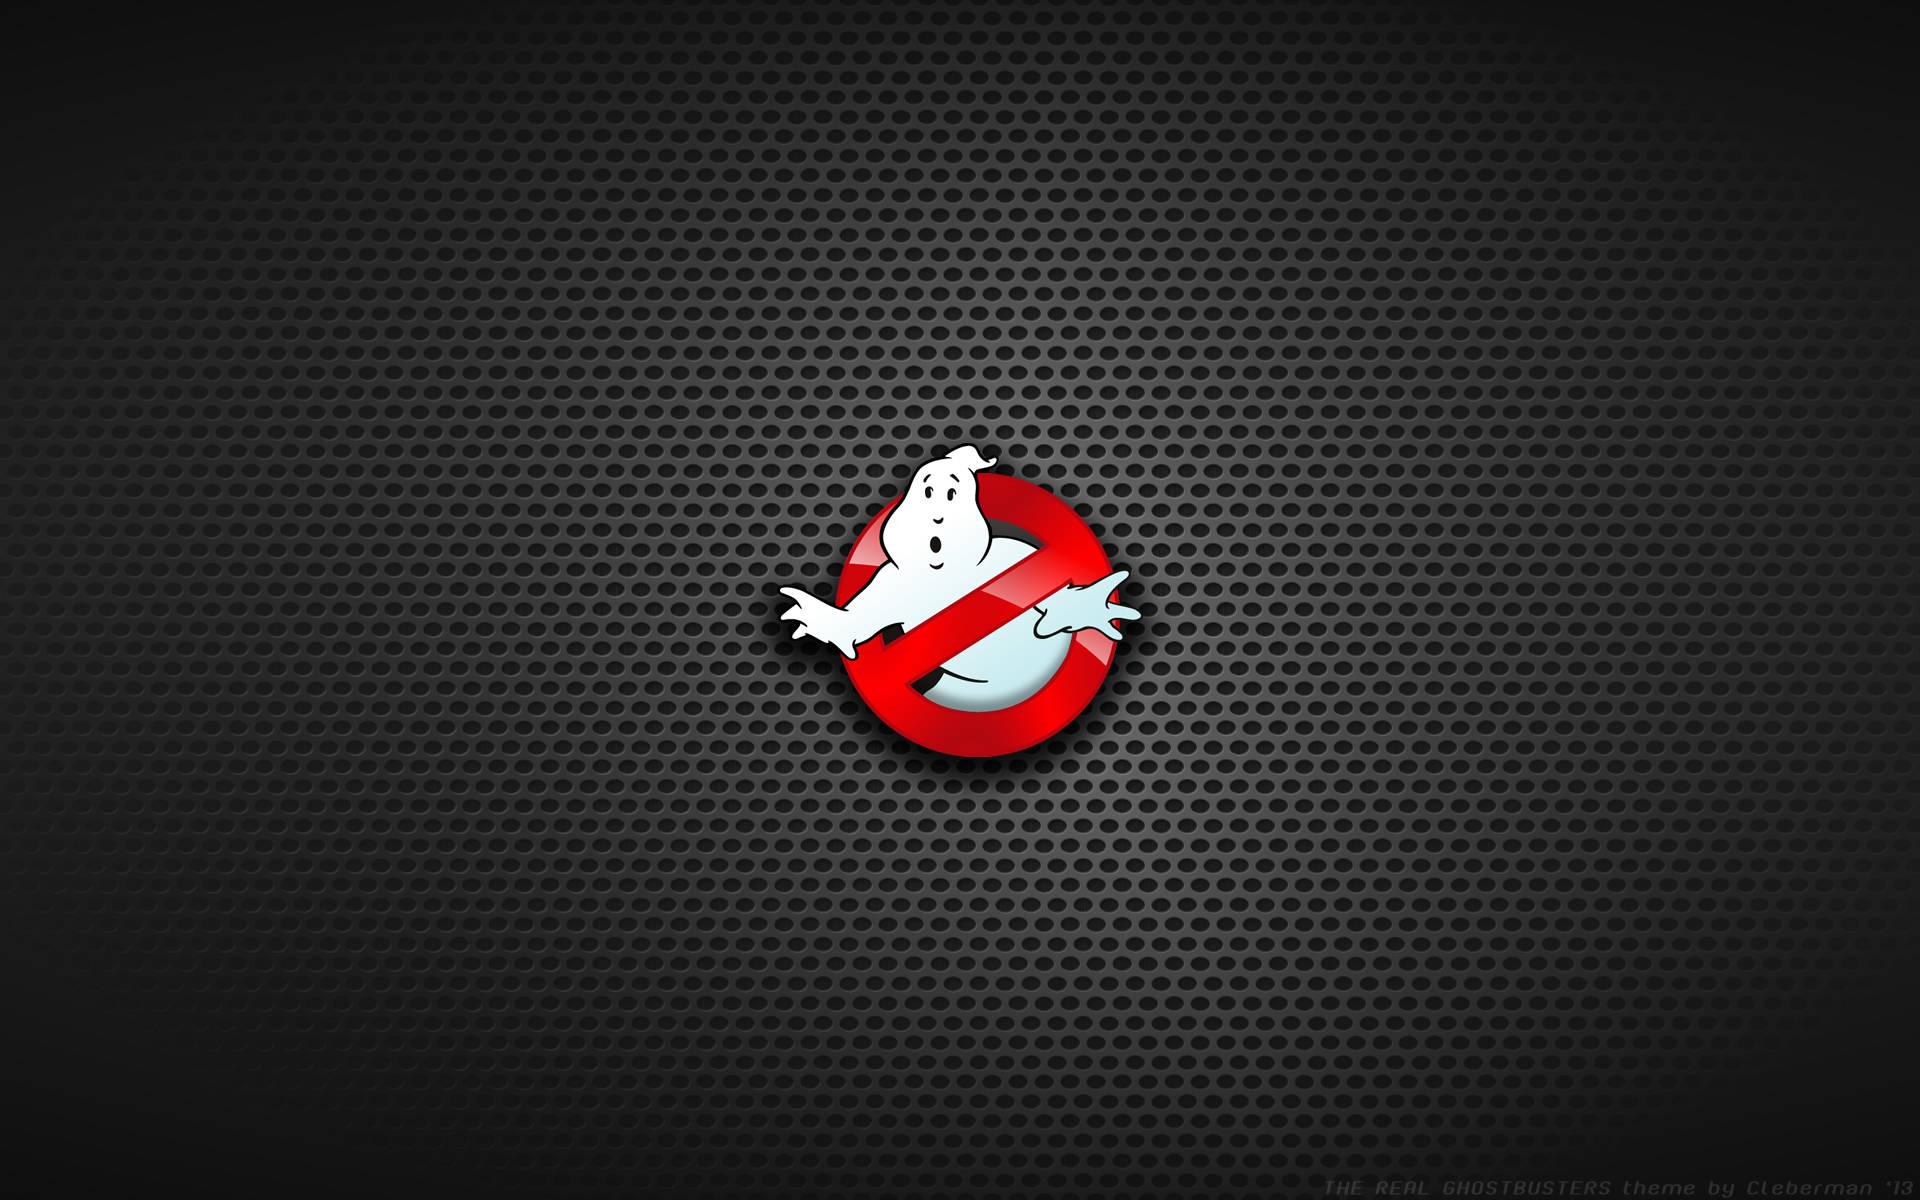 Ghostbusters Dotted Logo